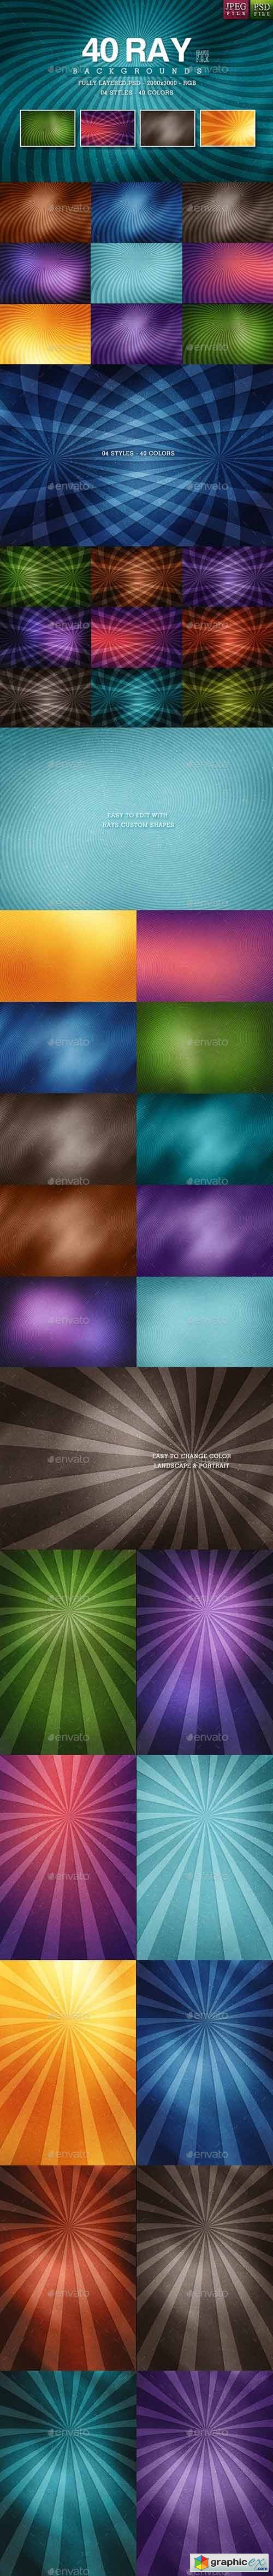 40 Ray Backgrounds - 04 Styles